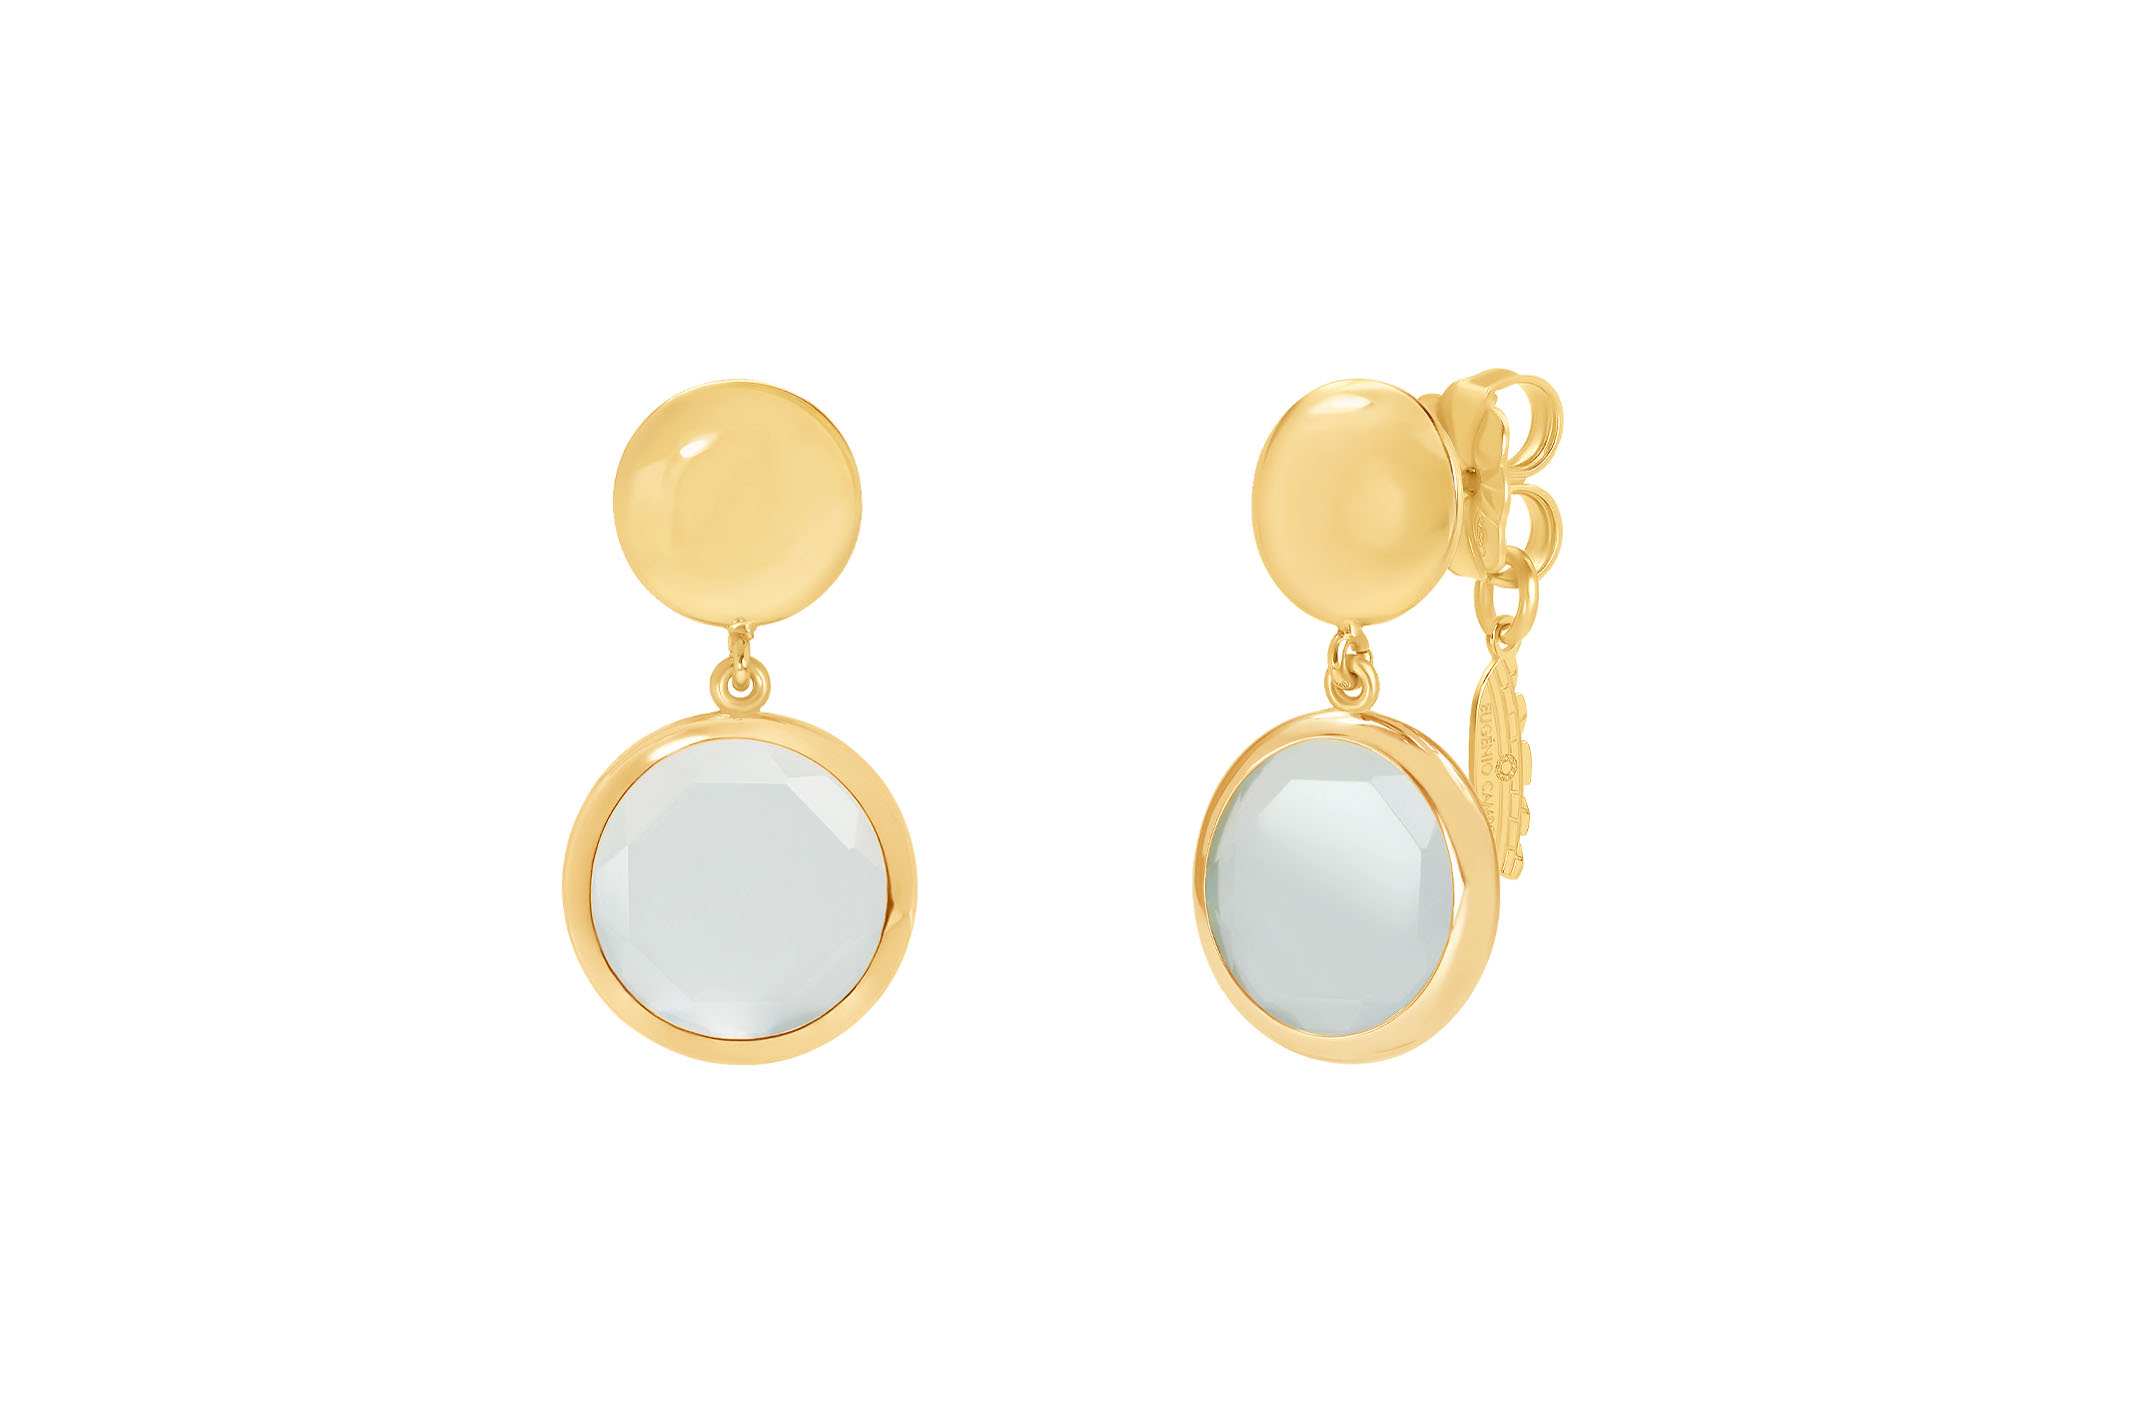 Jewel: earrings;Material: silver 925;Weight: 6 gr;Stone: zirconia;Color: yellow;Size: 3.2  cm;Gender: woman